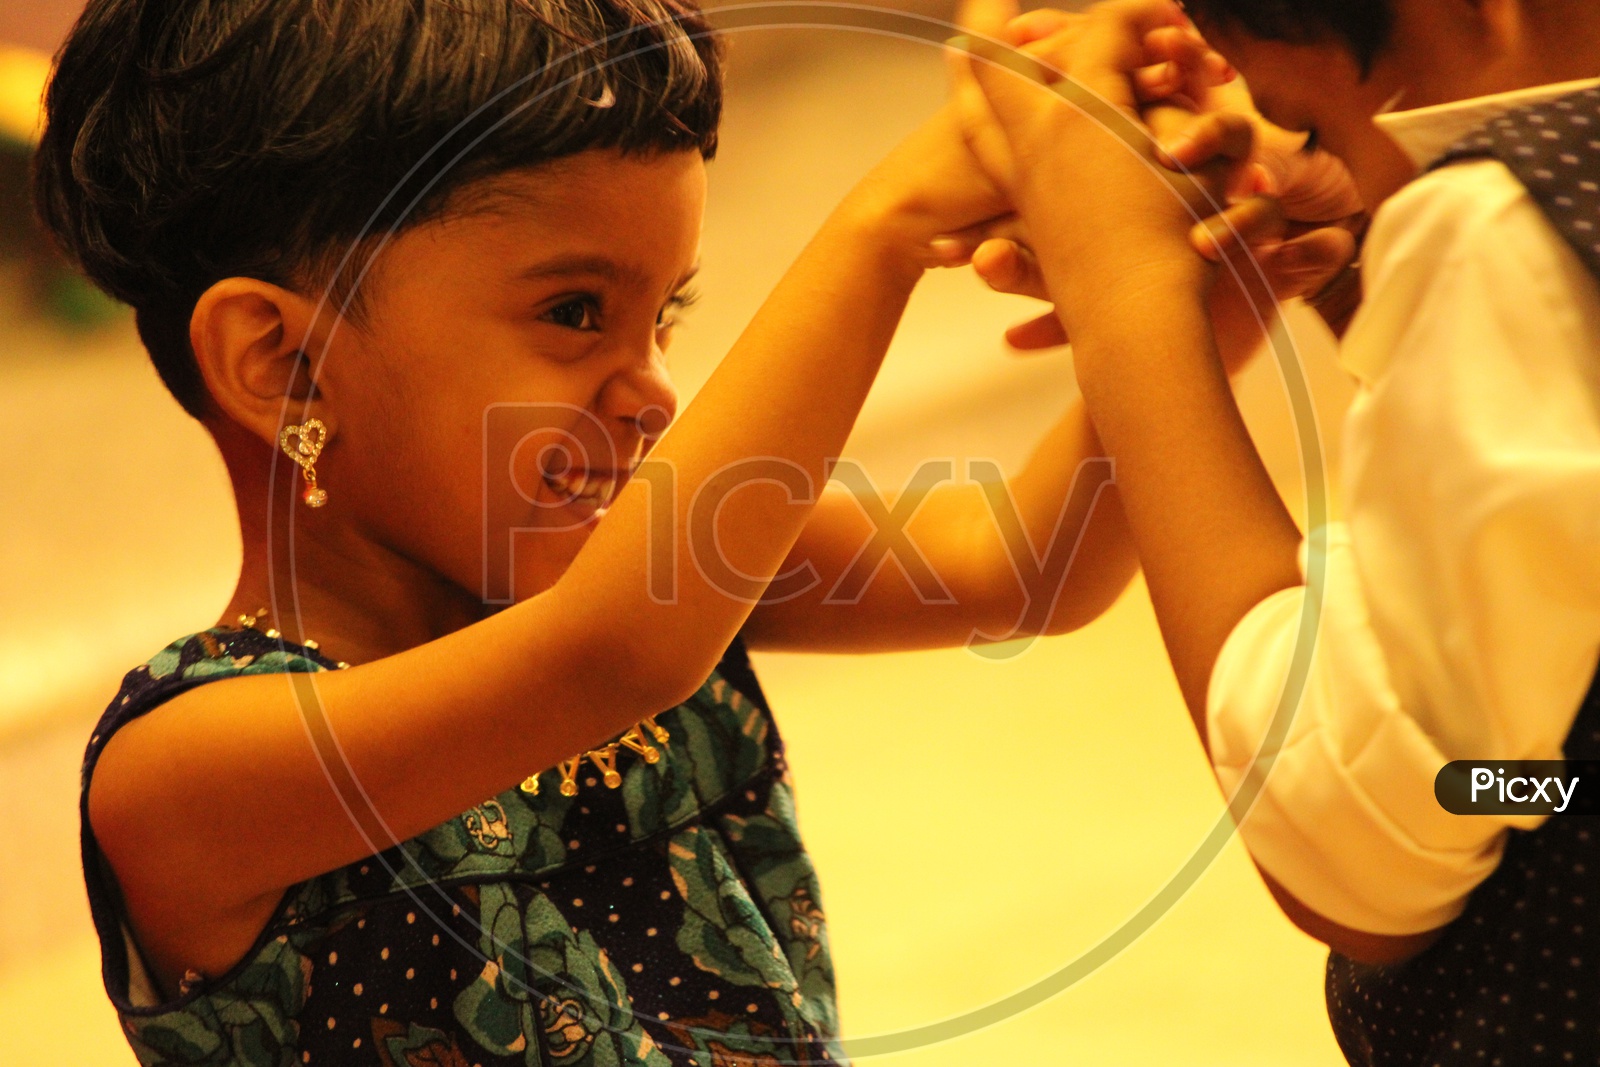 Young Girl Playing With Brother Or Sibling